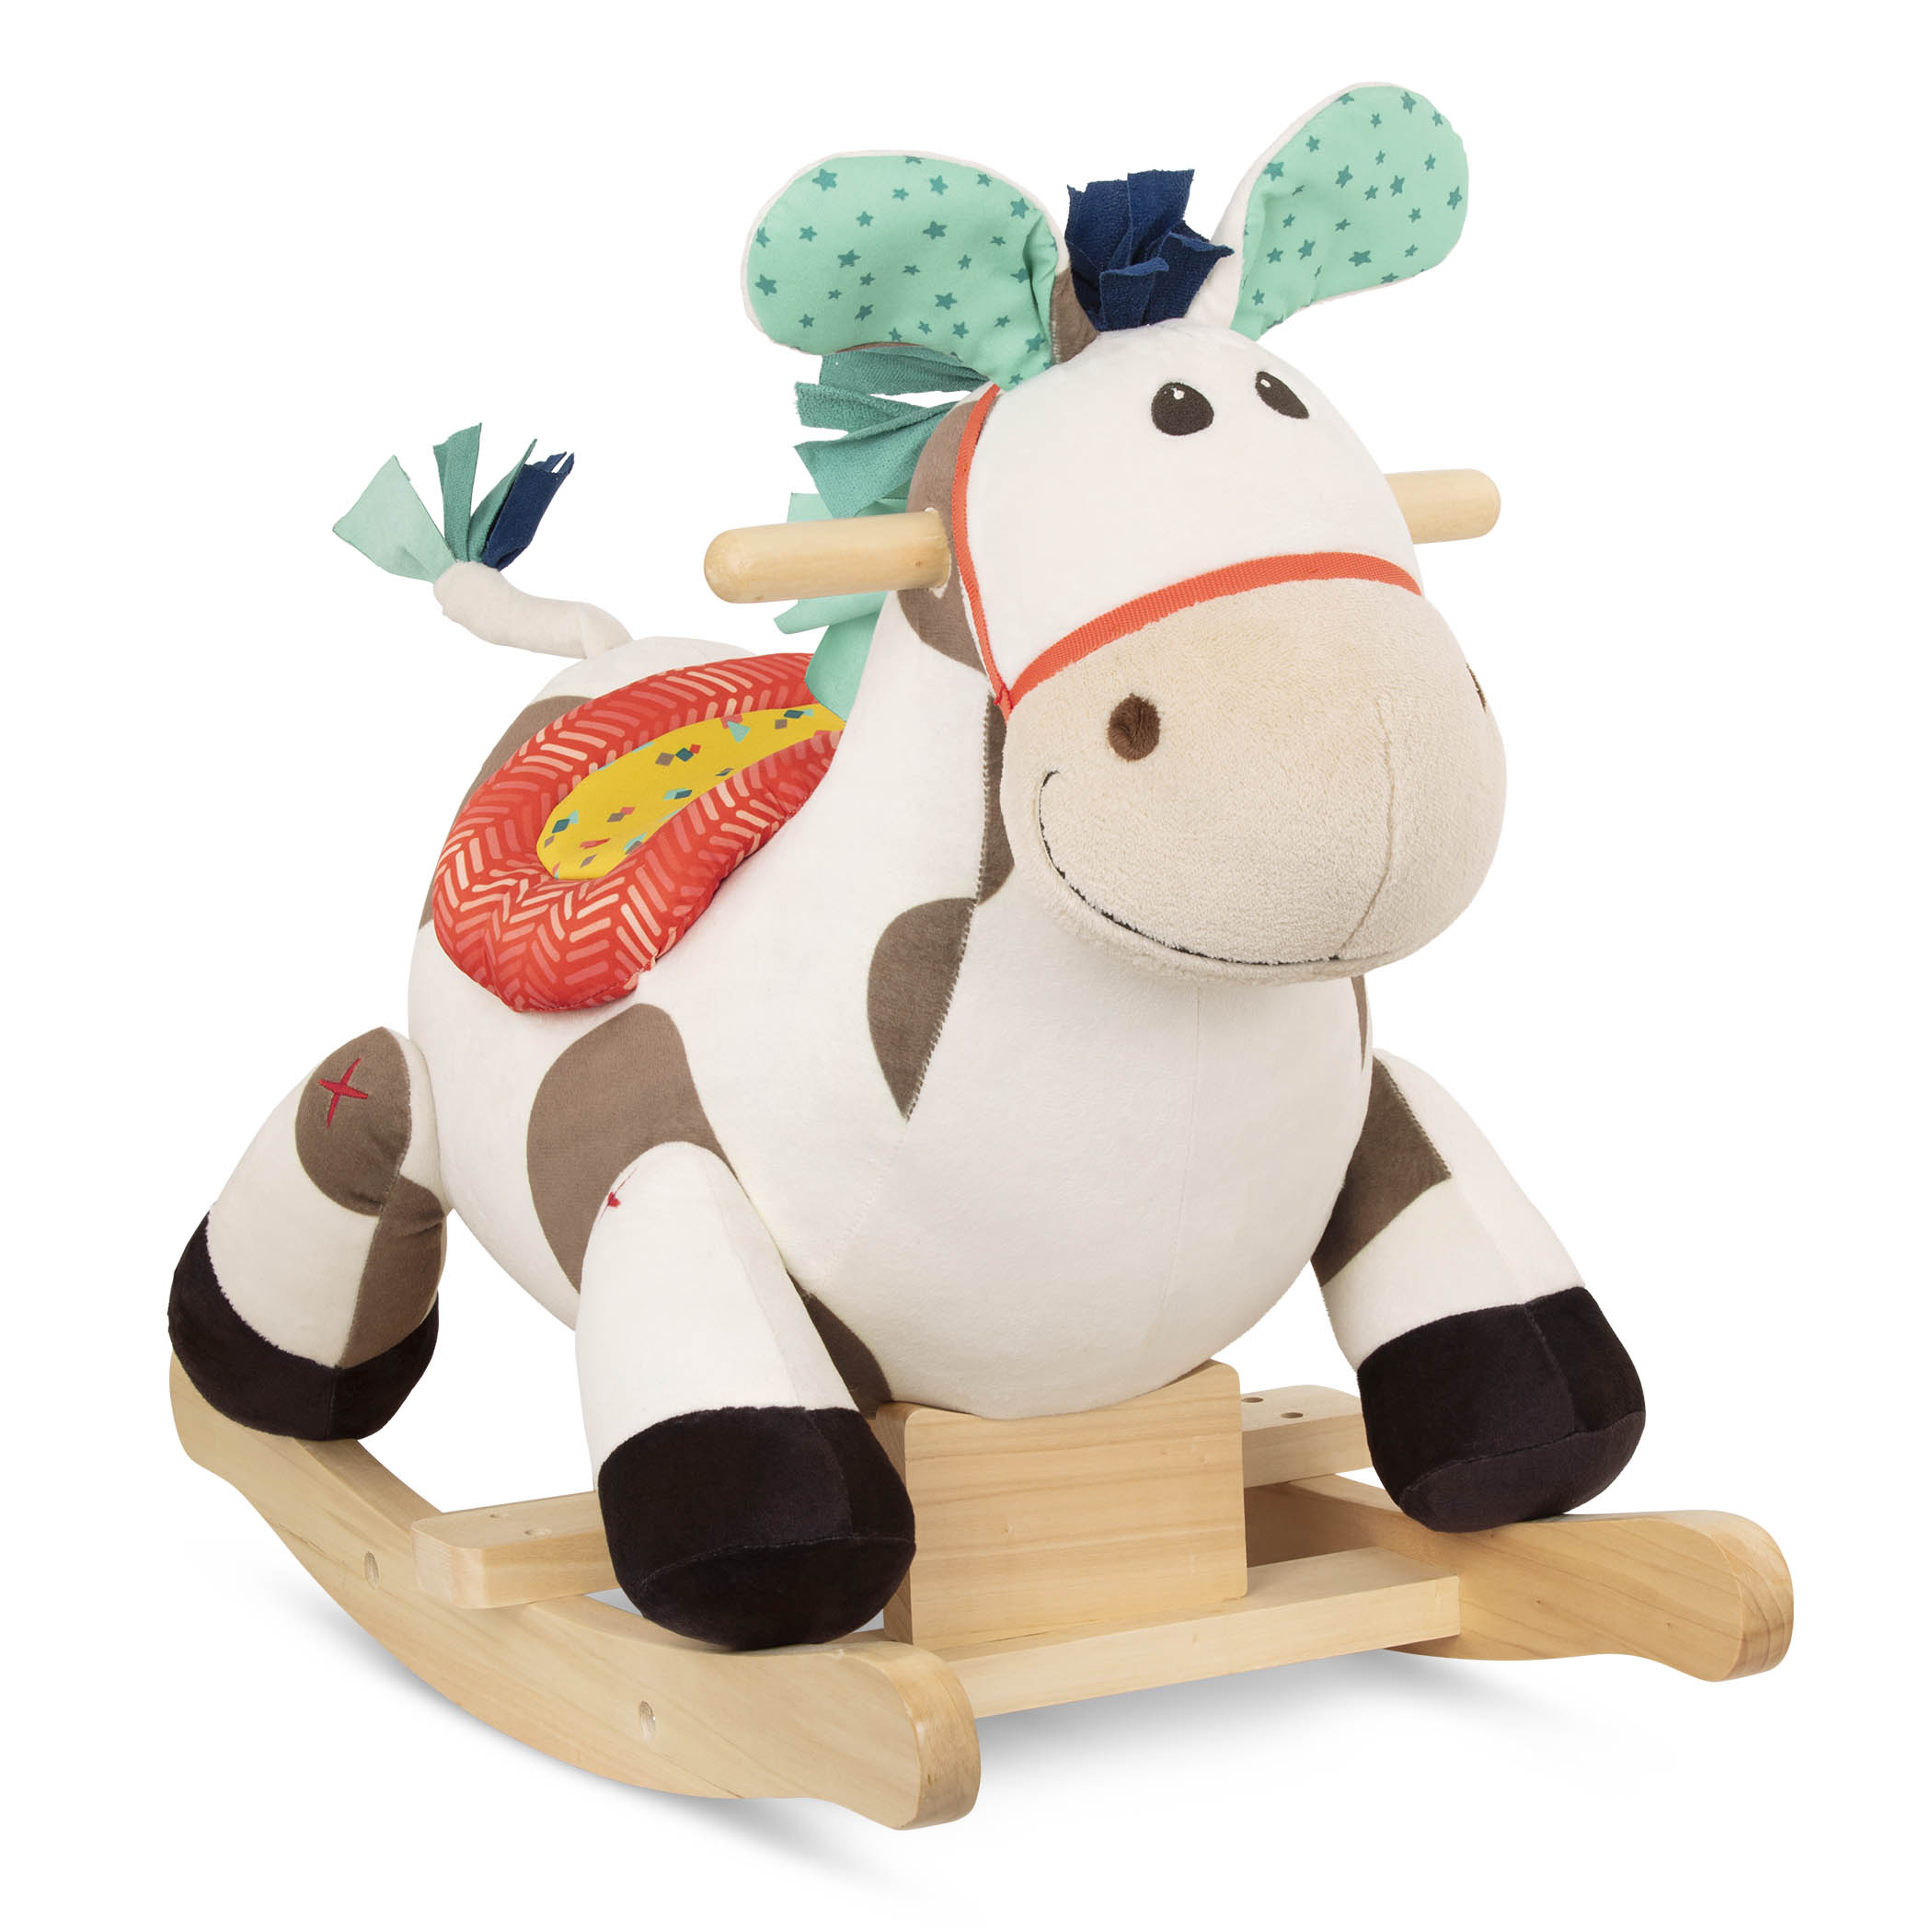 B Toys Classic Rocking Unicorn for Toddlers for sale online 